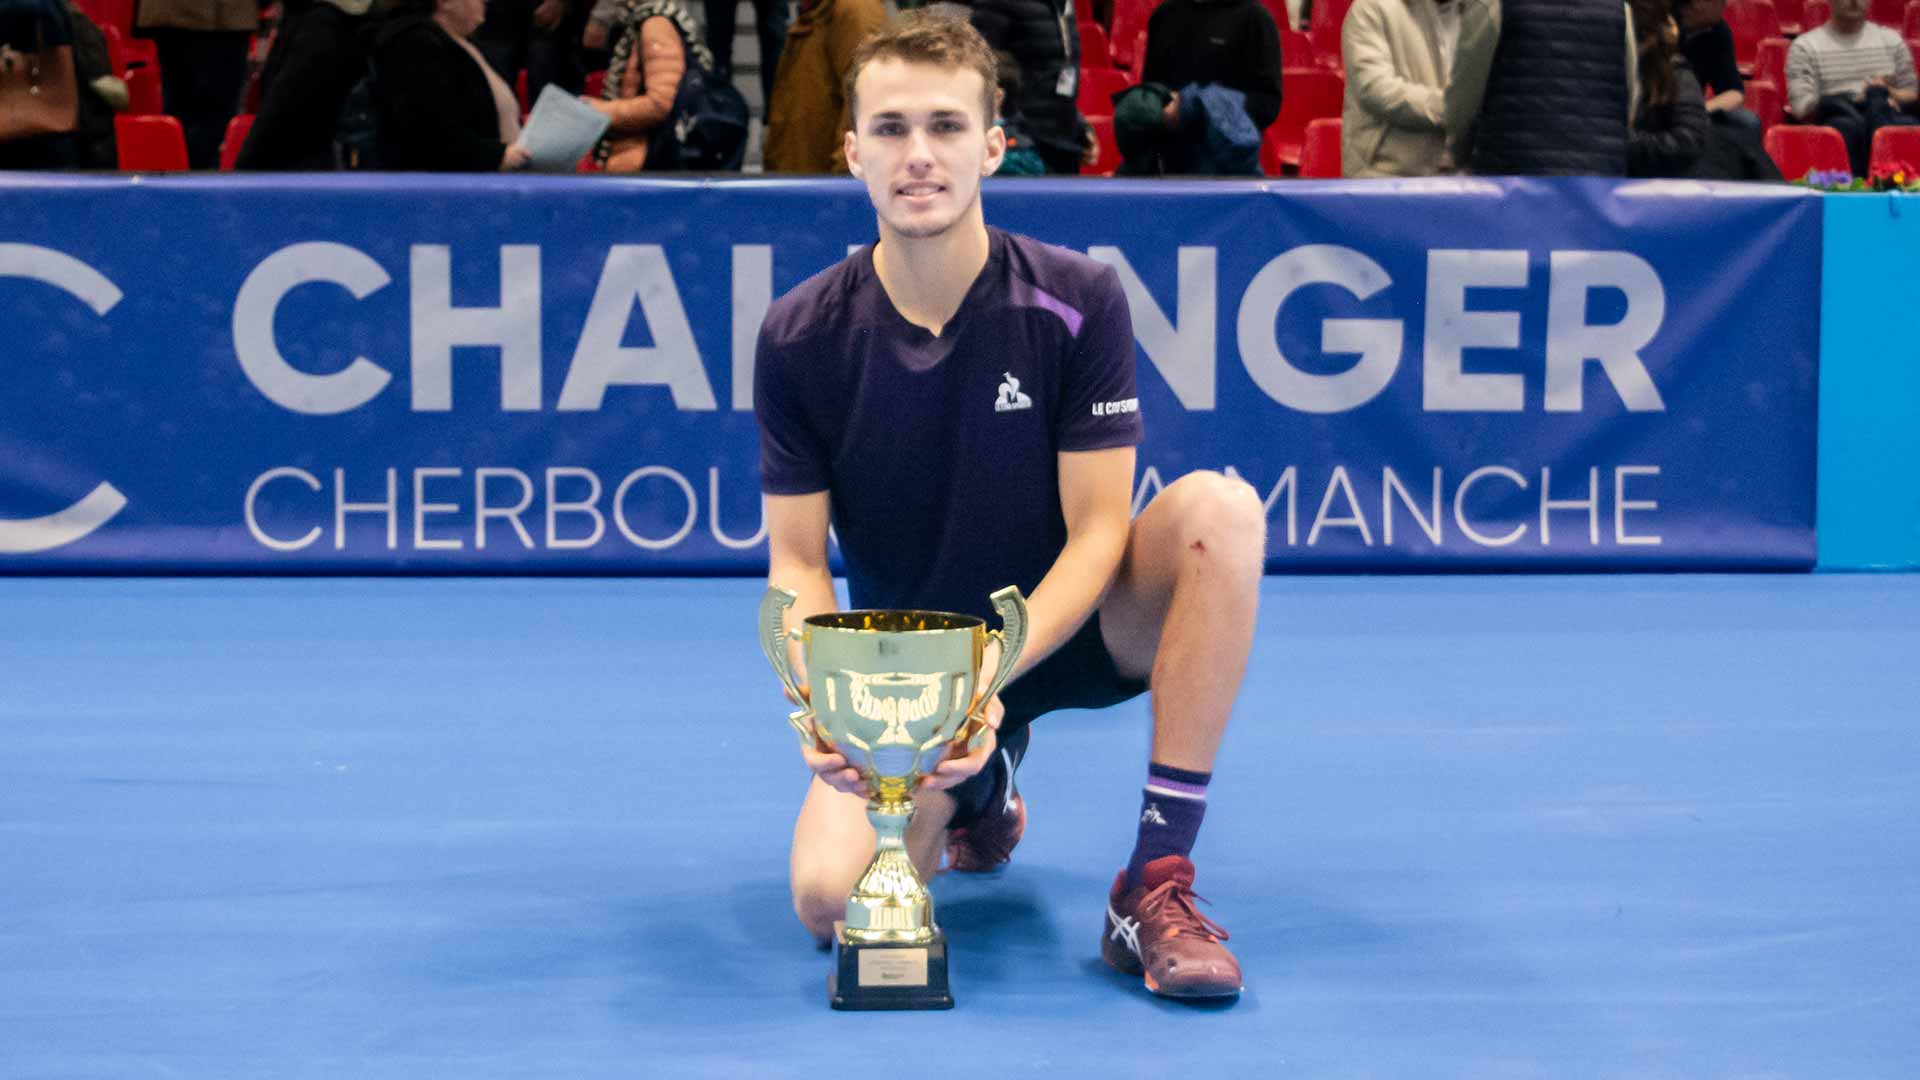 <a href='https://www.atptour.com/en/players/zsombor-piros/p09o/overview'>Zsombor Piros</a> is crowned champion at the ATP Challenger 75 in Cherbourg, France.